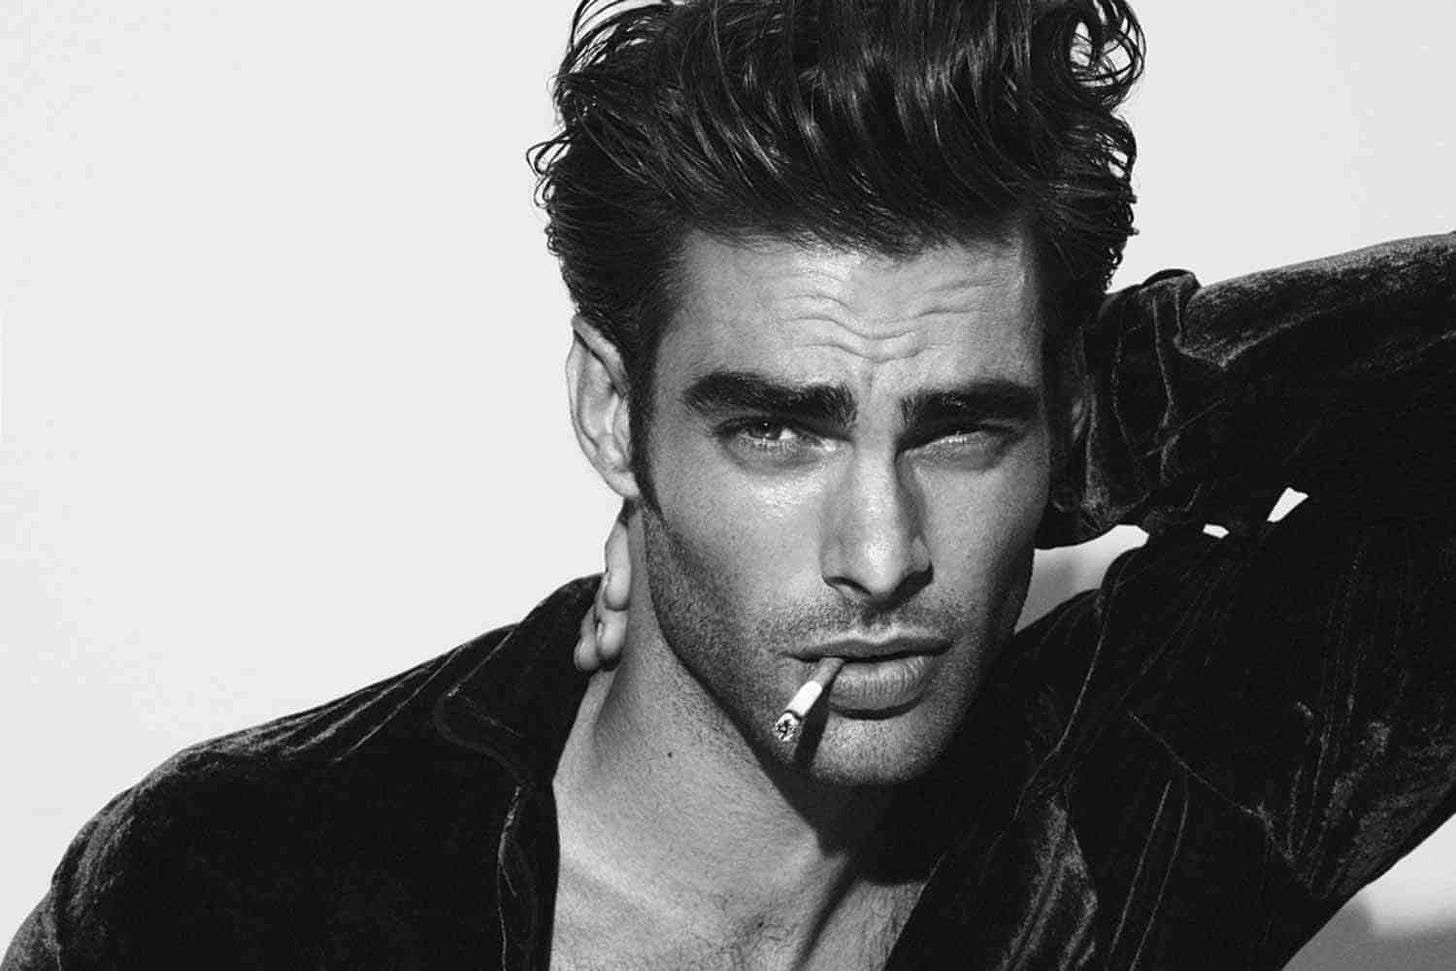 Jon Kortajarena, Male Model of the Year and Man on a Mission